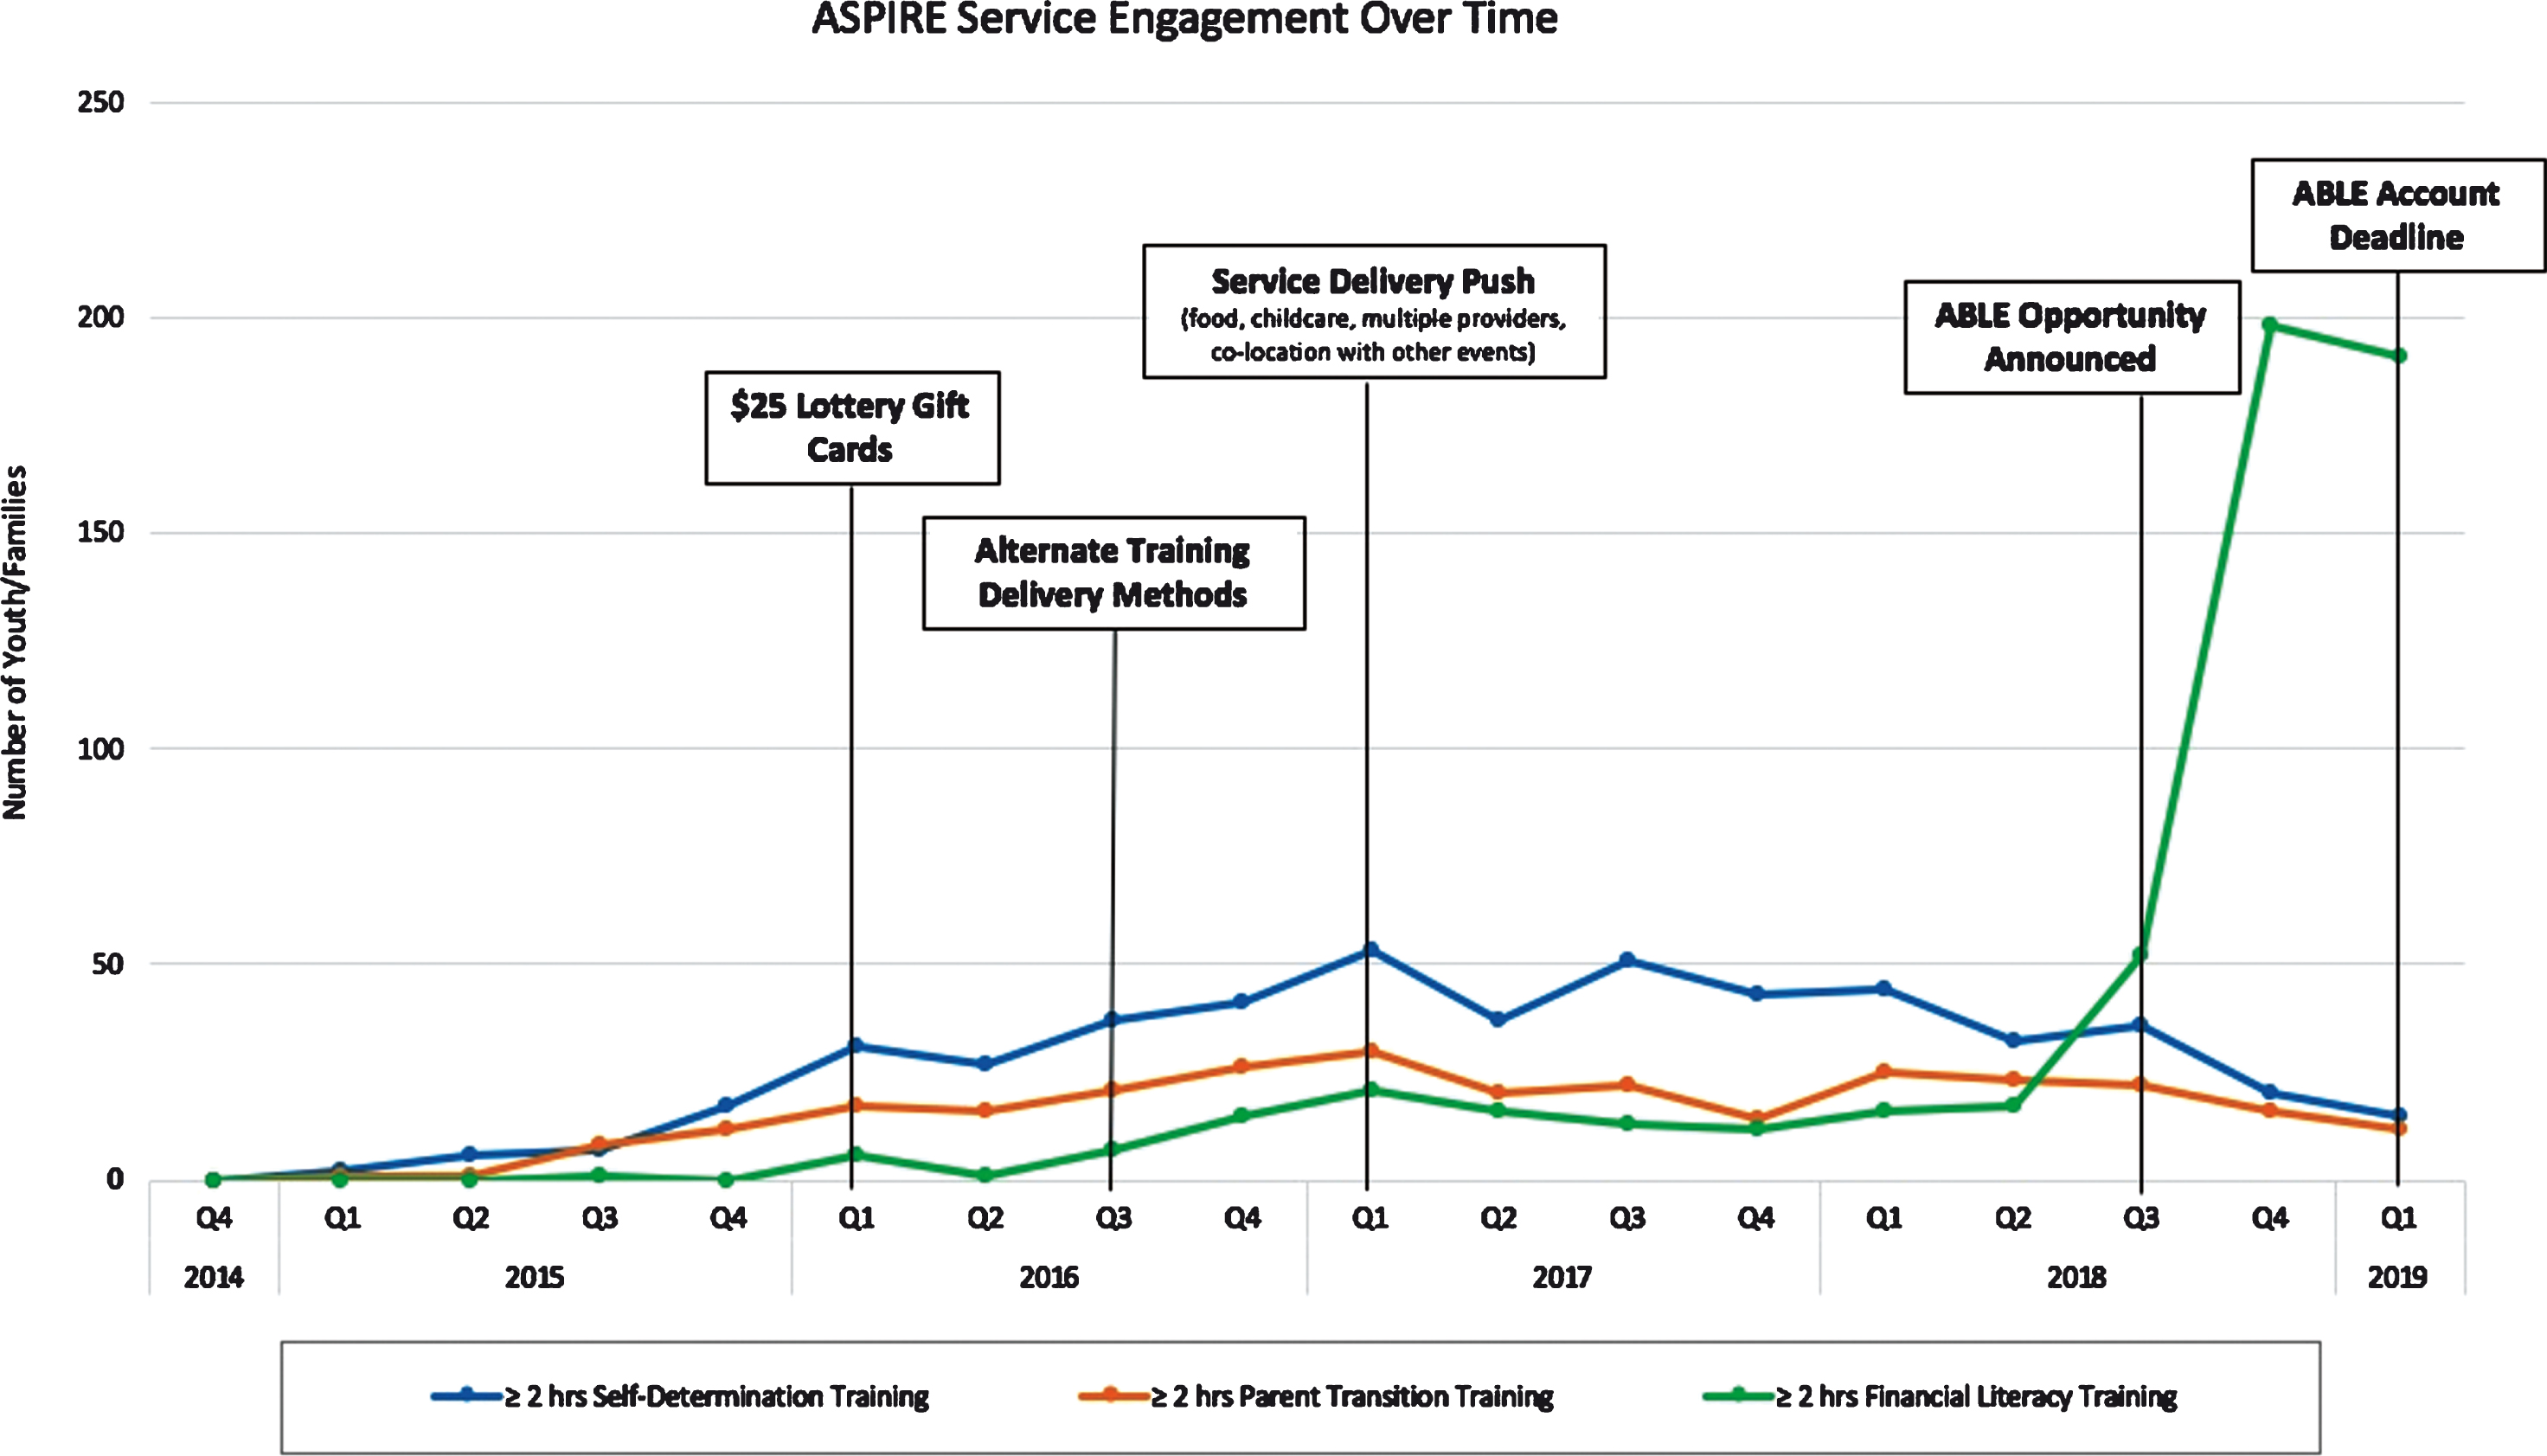 ASPIRE service engagement over time.